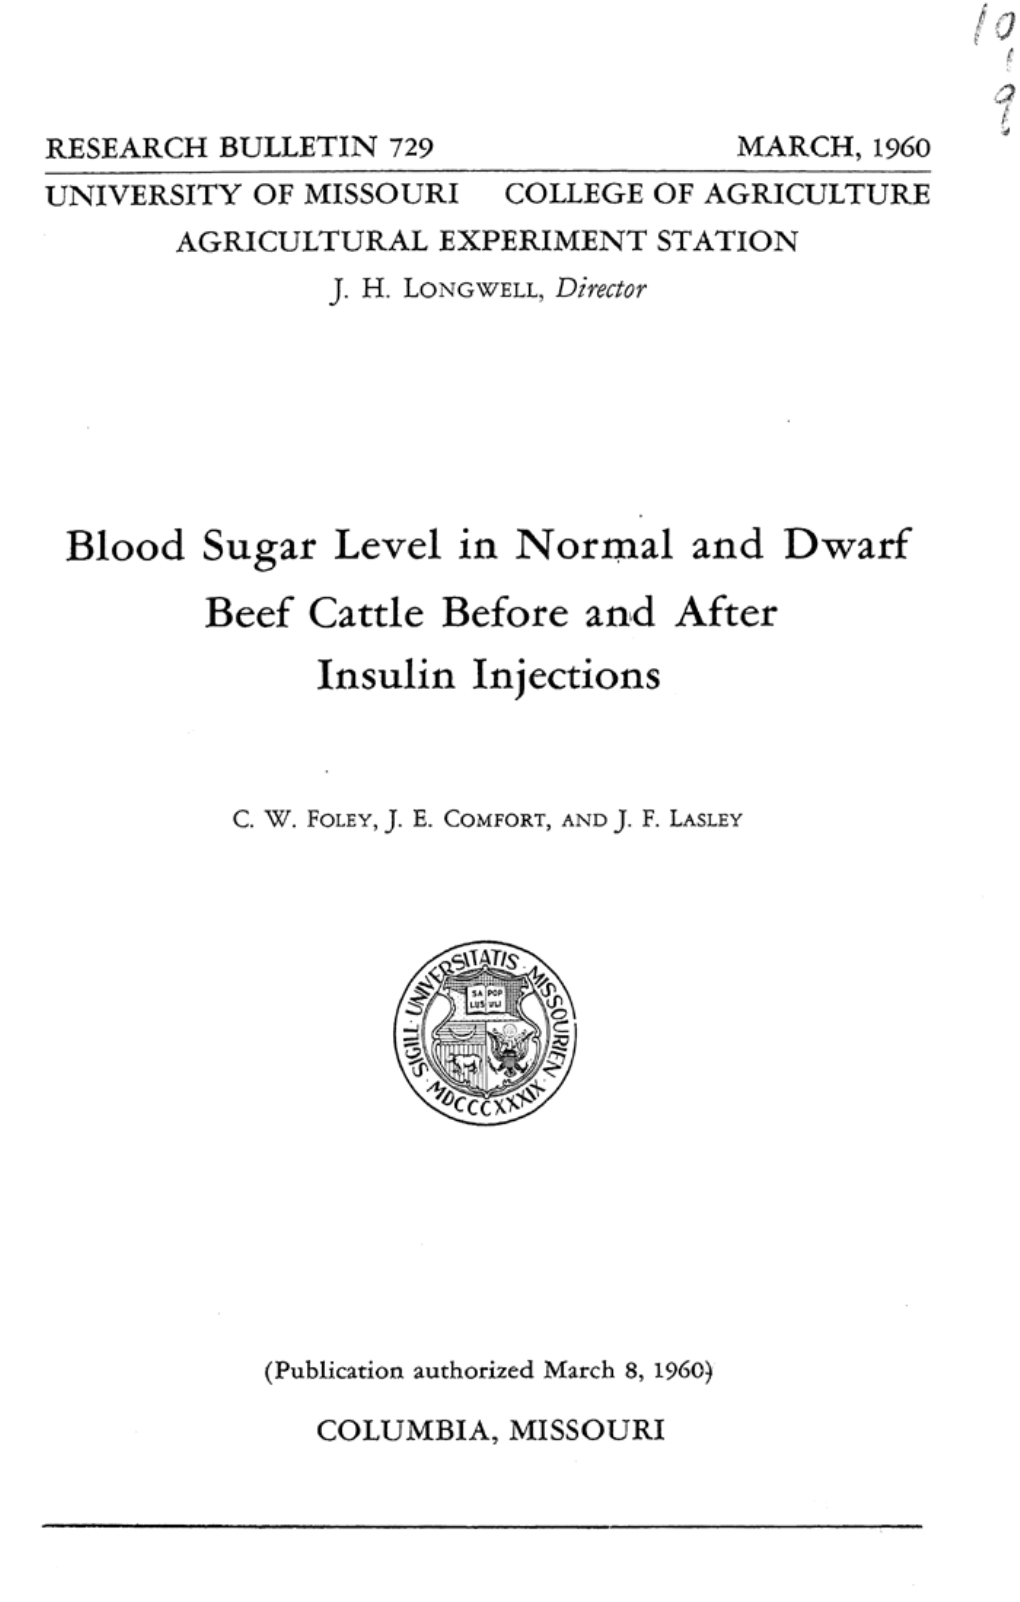 Blood Sugar Level in Normal and Dwarf Beef Cattle Before and After Insulin Injections